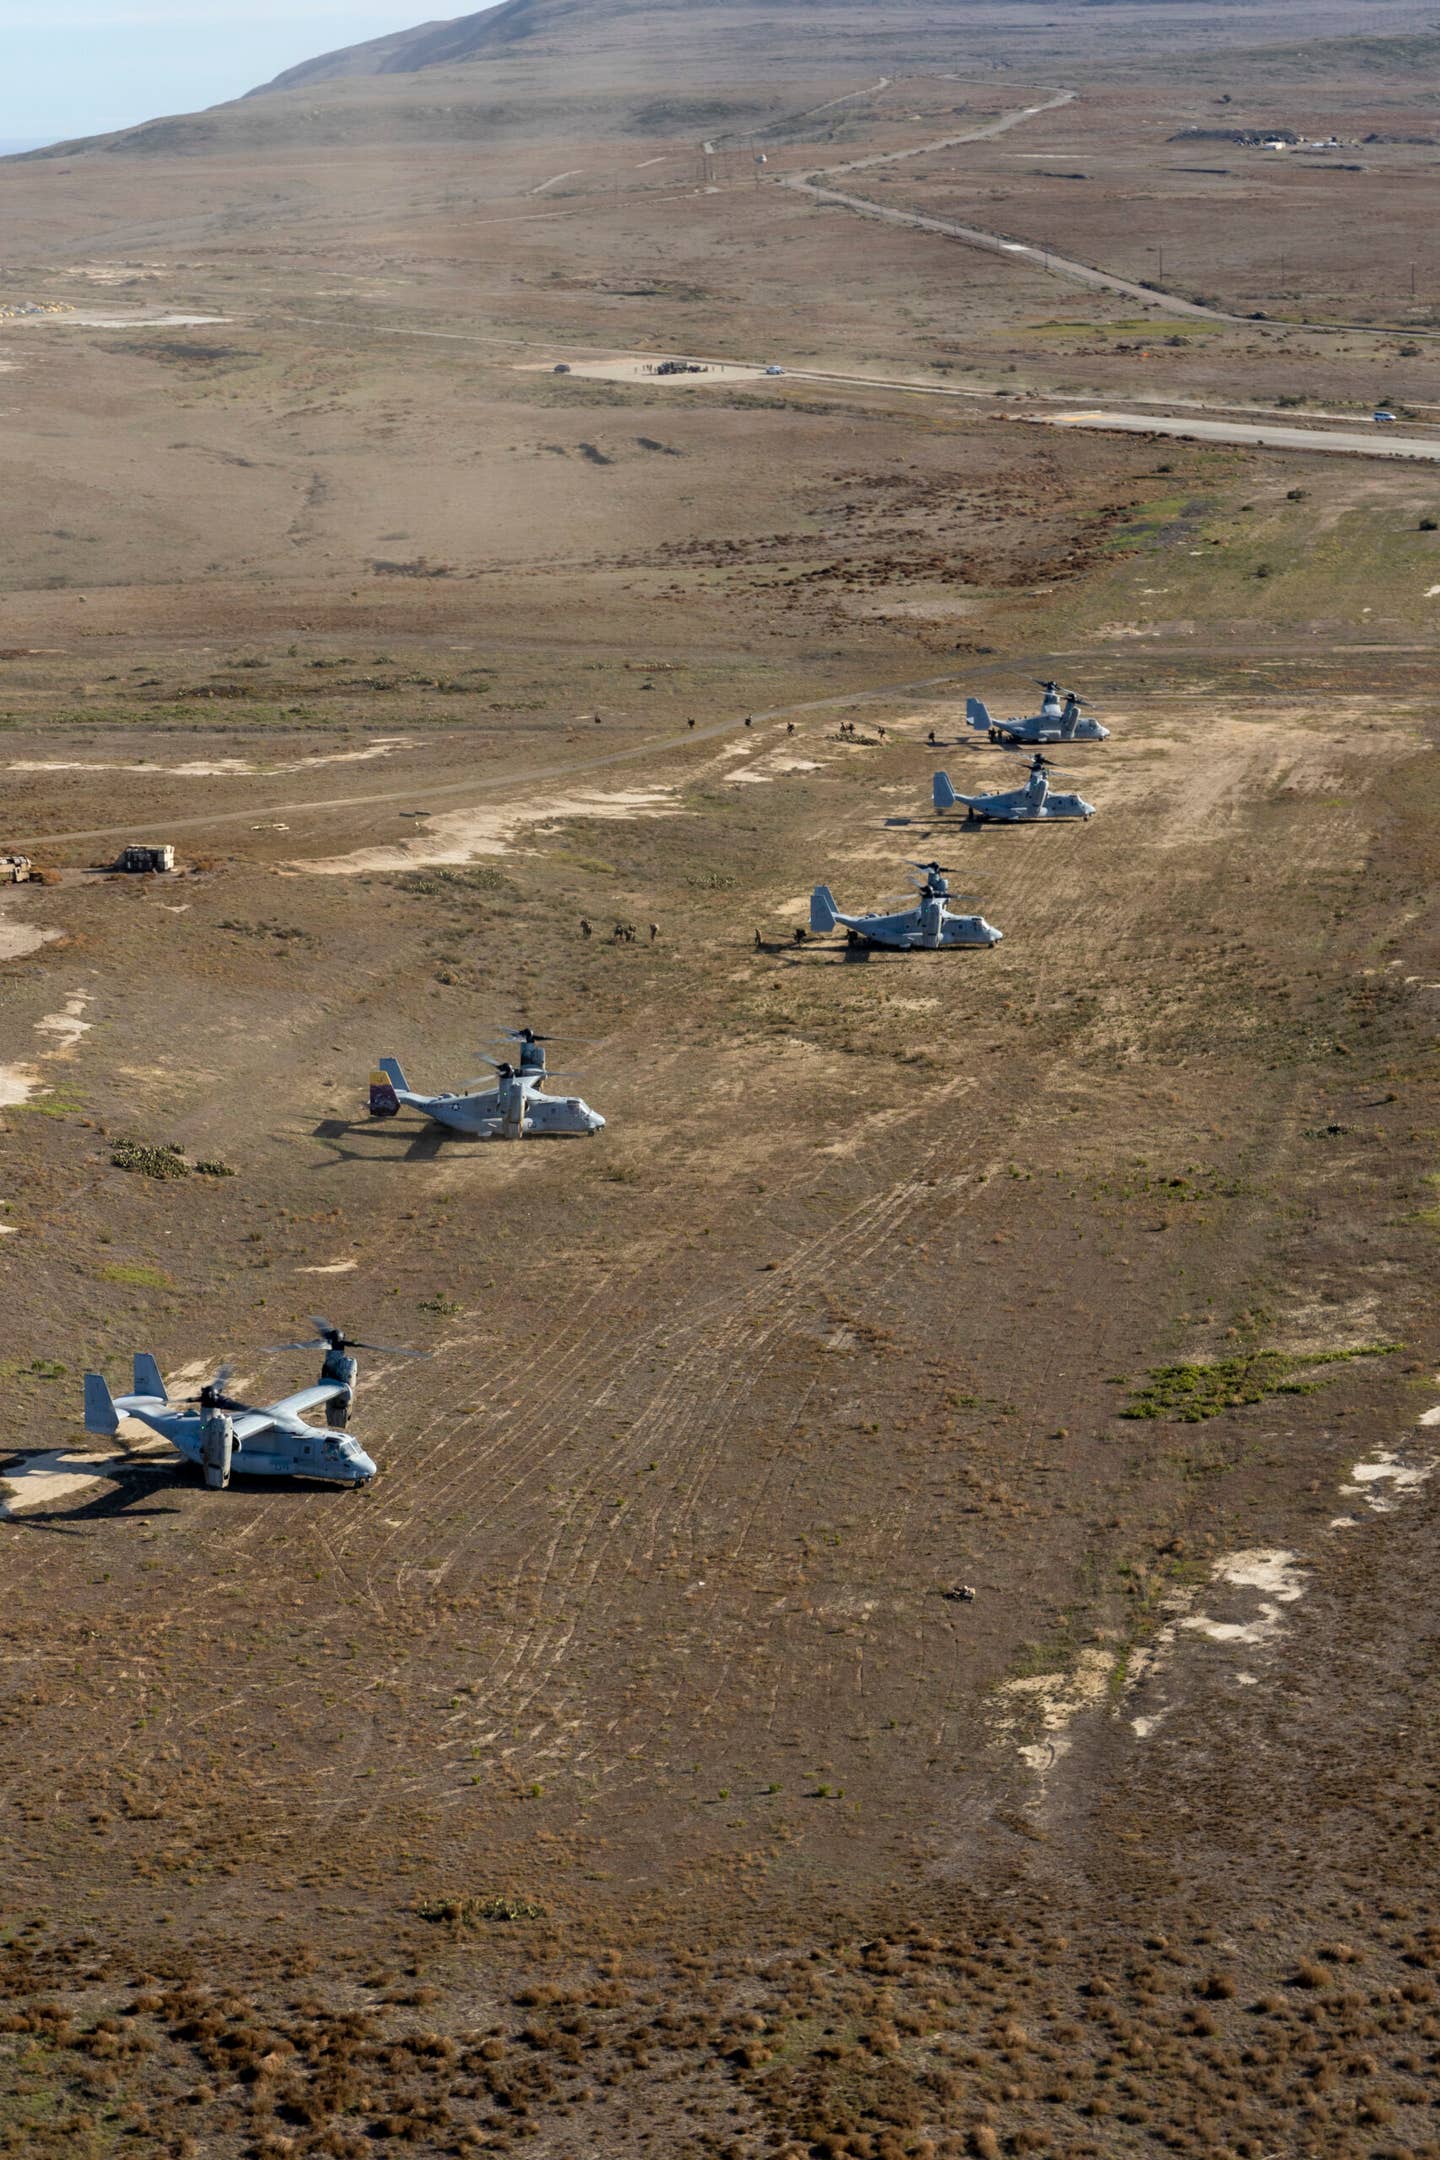 U.S. Marine Corps MV-22B Ospreys with Marine Aircraft Group 39, 3rd Marine Aircraft Wing (MAW), land on San Clemente Island, California, Dec. 3, 2022, during an air assault as part of Exercise Steel Knight 23. (U.S. Marine Corps photo by Lance Cpl. Isaac Velasco)